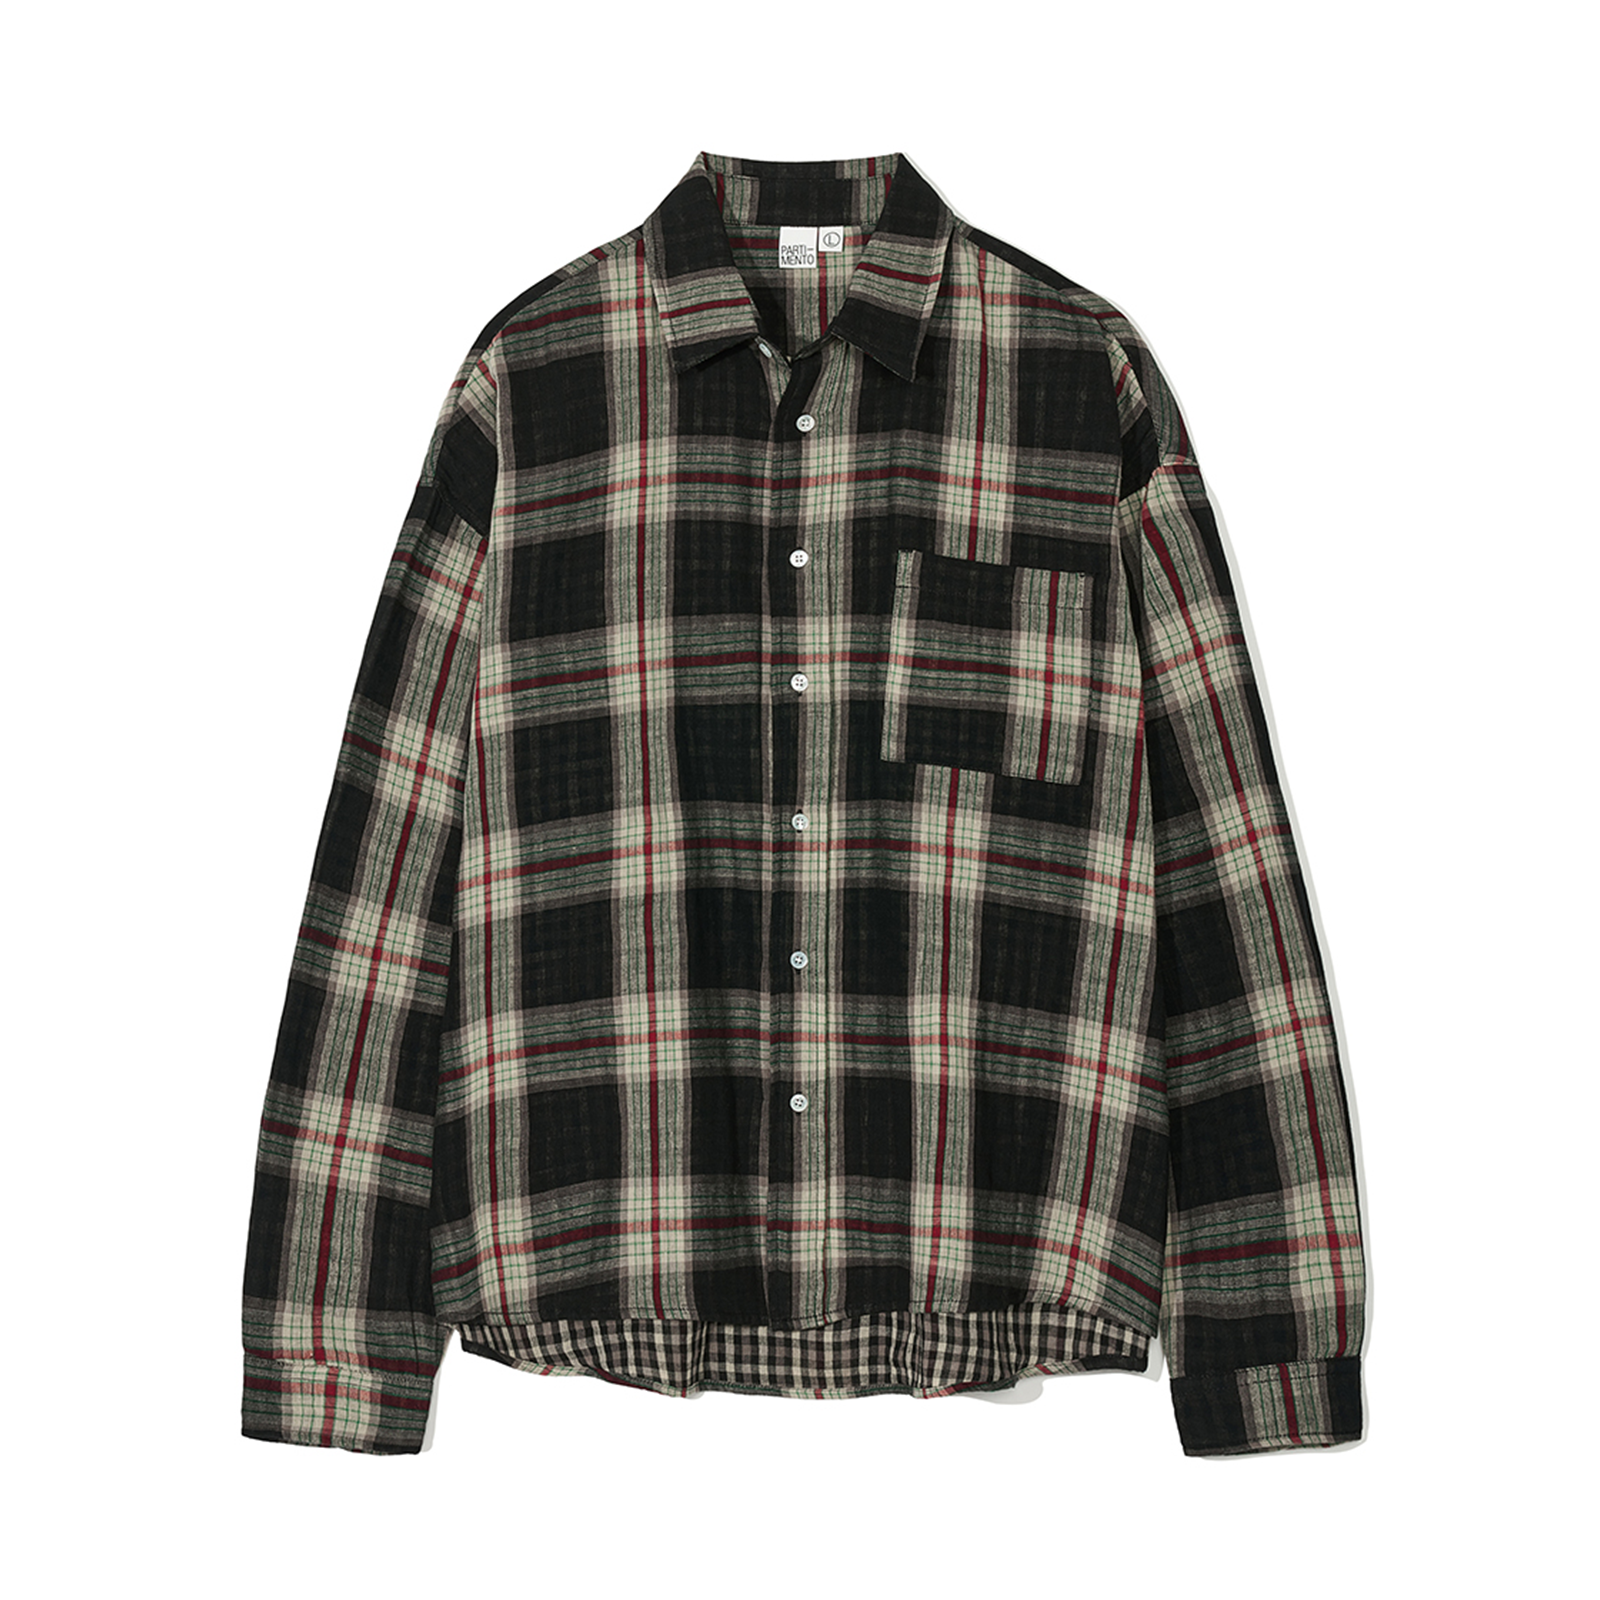 Partimento Reverse Check Shirt in Black